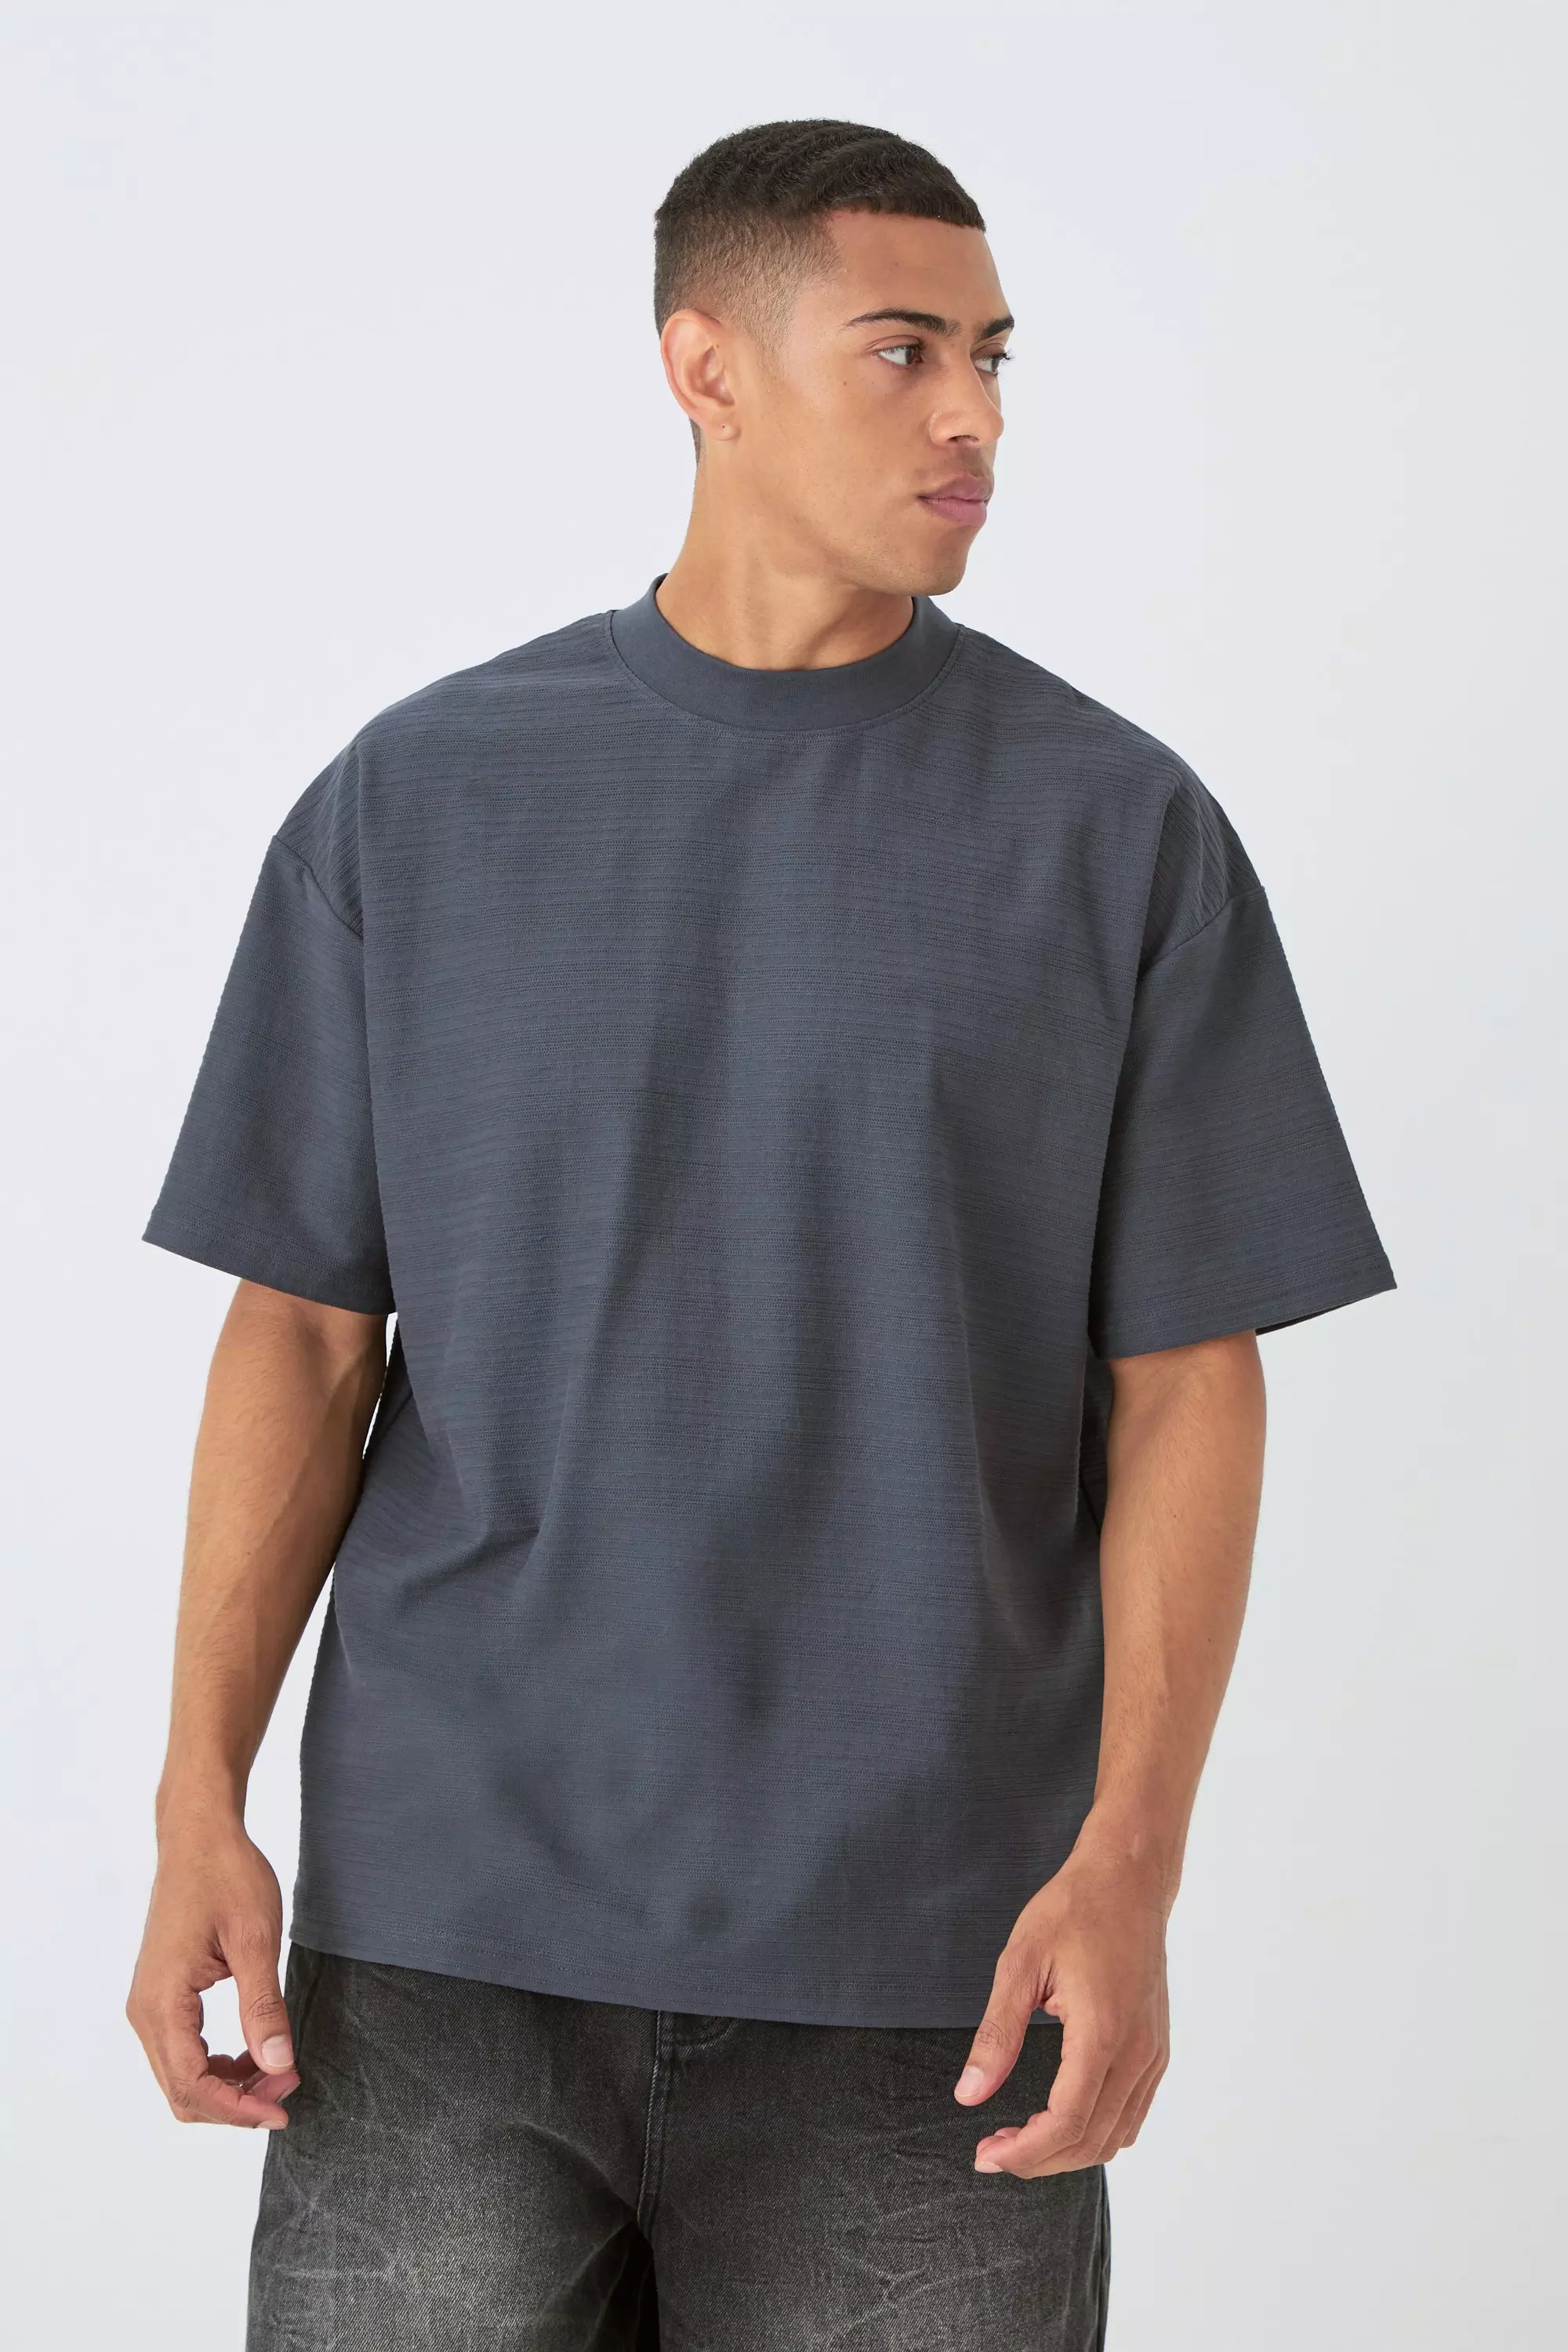 Oversized Jacquard Raised Striped Extended Neck T-shirt Charcoal